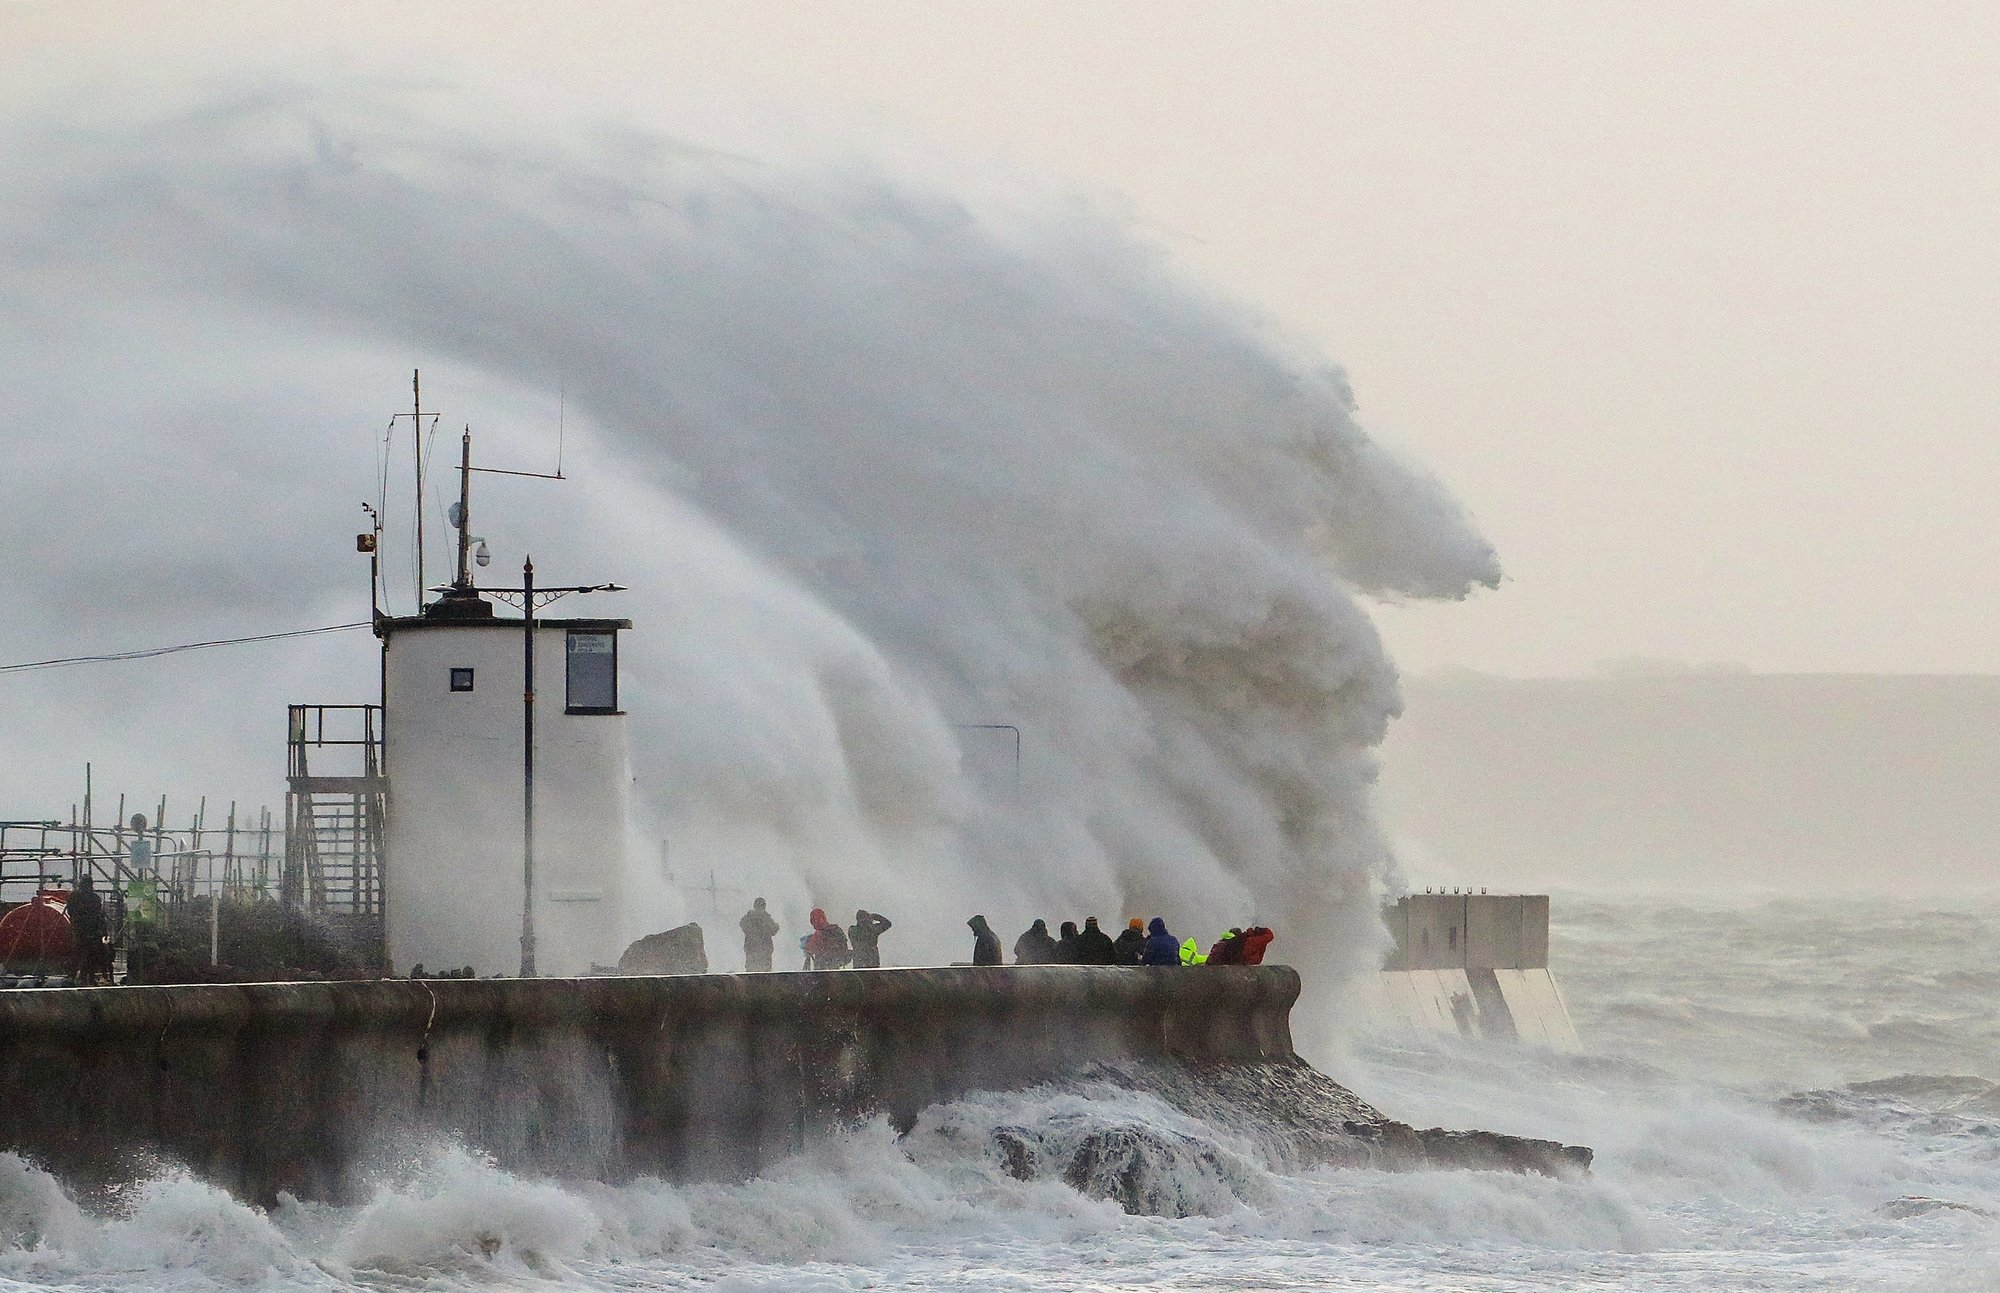 Terrible storm rages in England, tosses ferries, traverses pedestrians, and strands millions